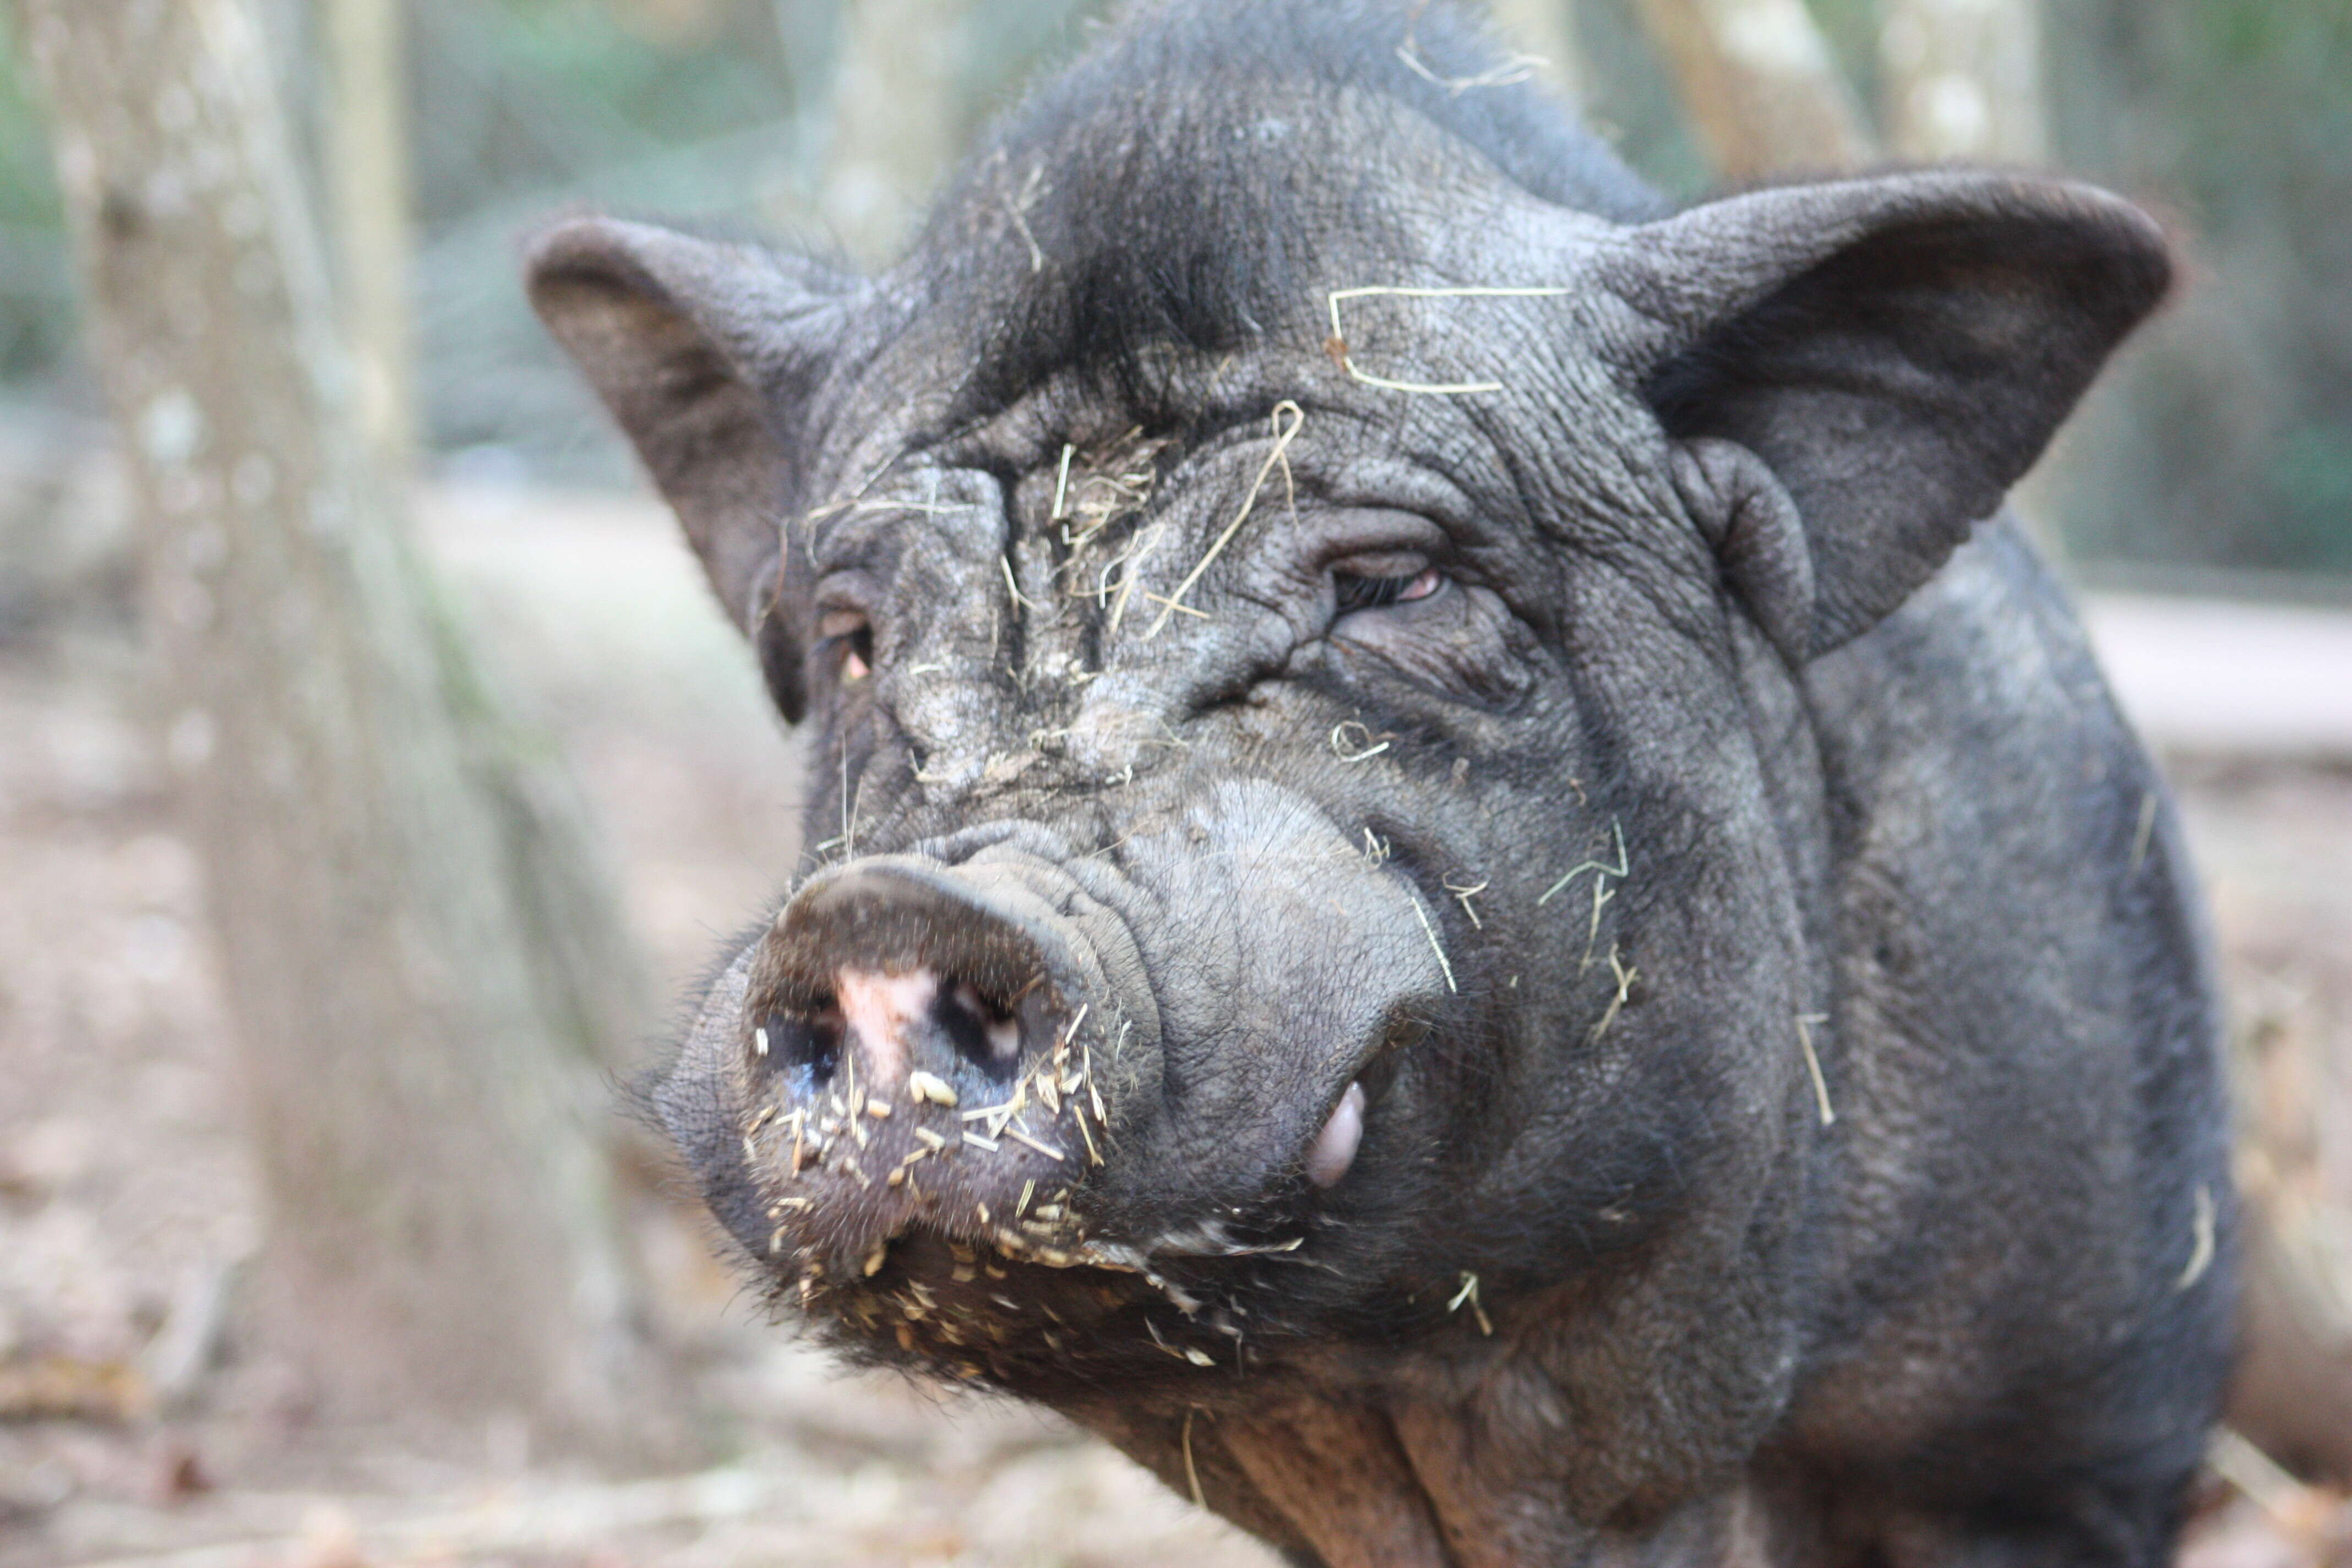 Rescue pig at sanctuary in Spain